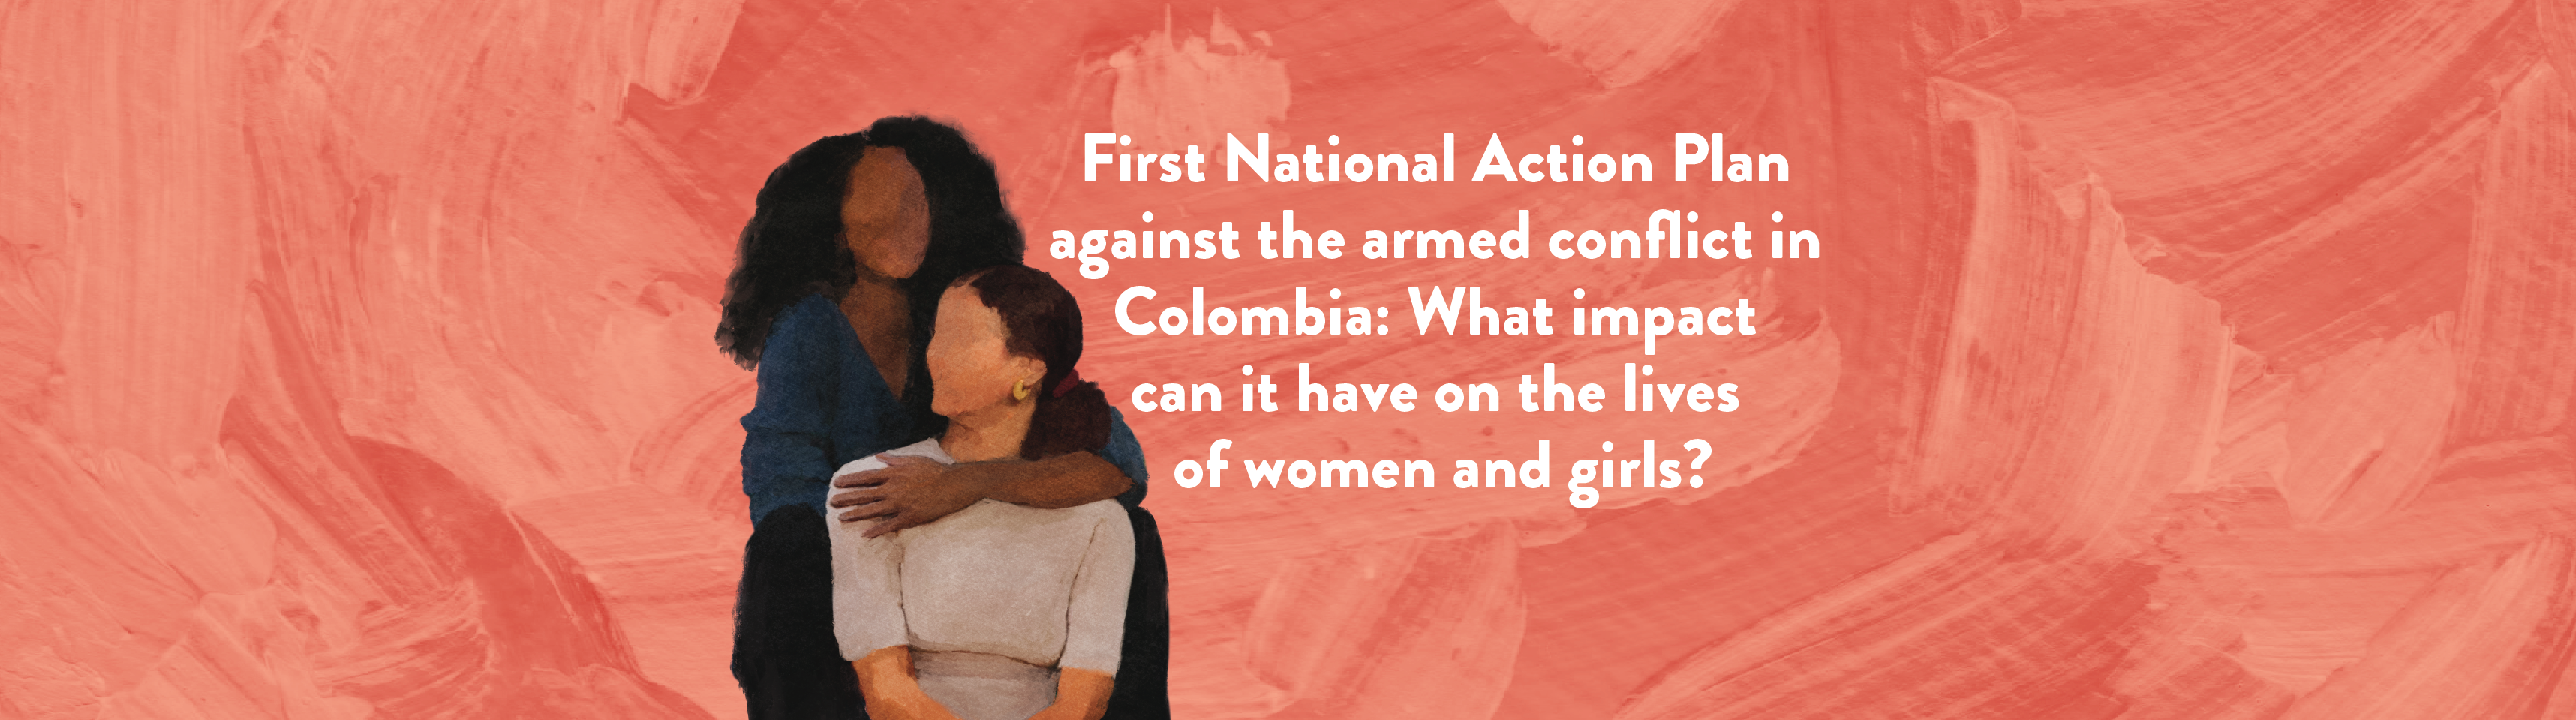 First National Action Plan against the armed conflict in Colombia: What impact can it have on the lives of women and girls? 